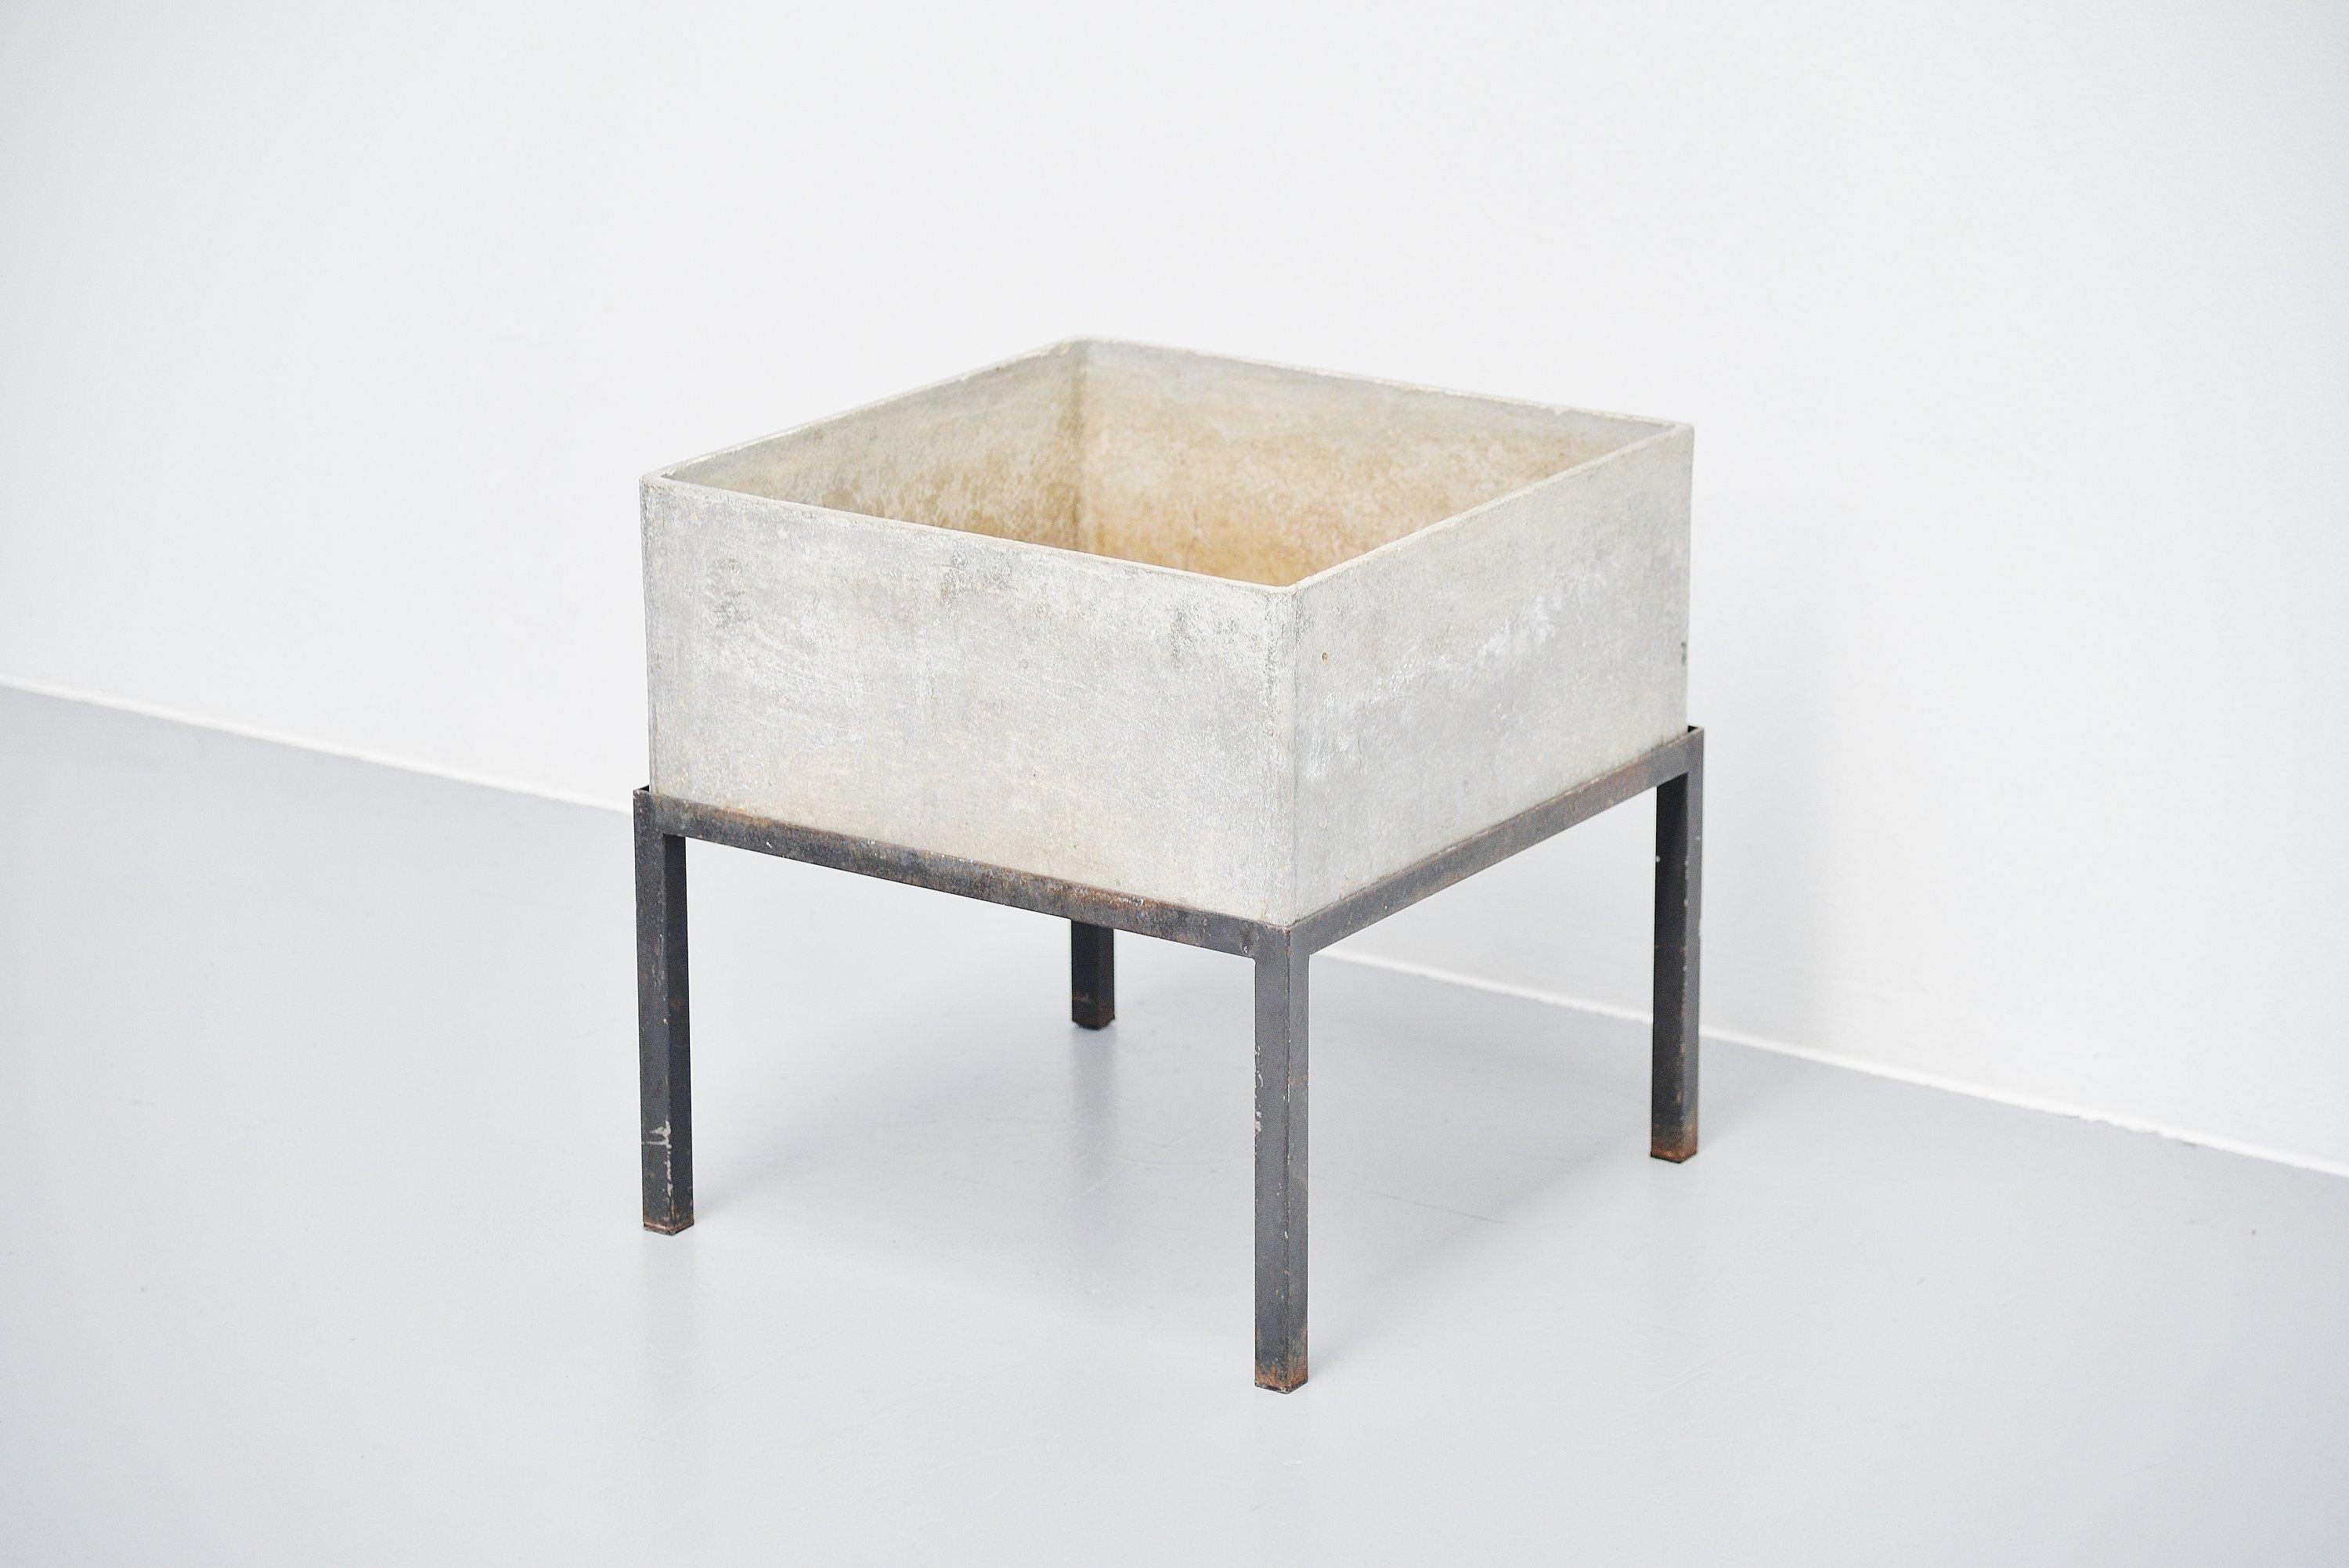 Nice square planter designed by Willy Guhl and manufactured by Eternit AG, Switzerland, 1960. This planter has a square shape but the metal base makes this piece look more special, hard to find with the original base. The planter is made of